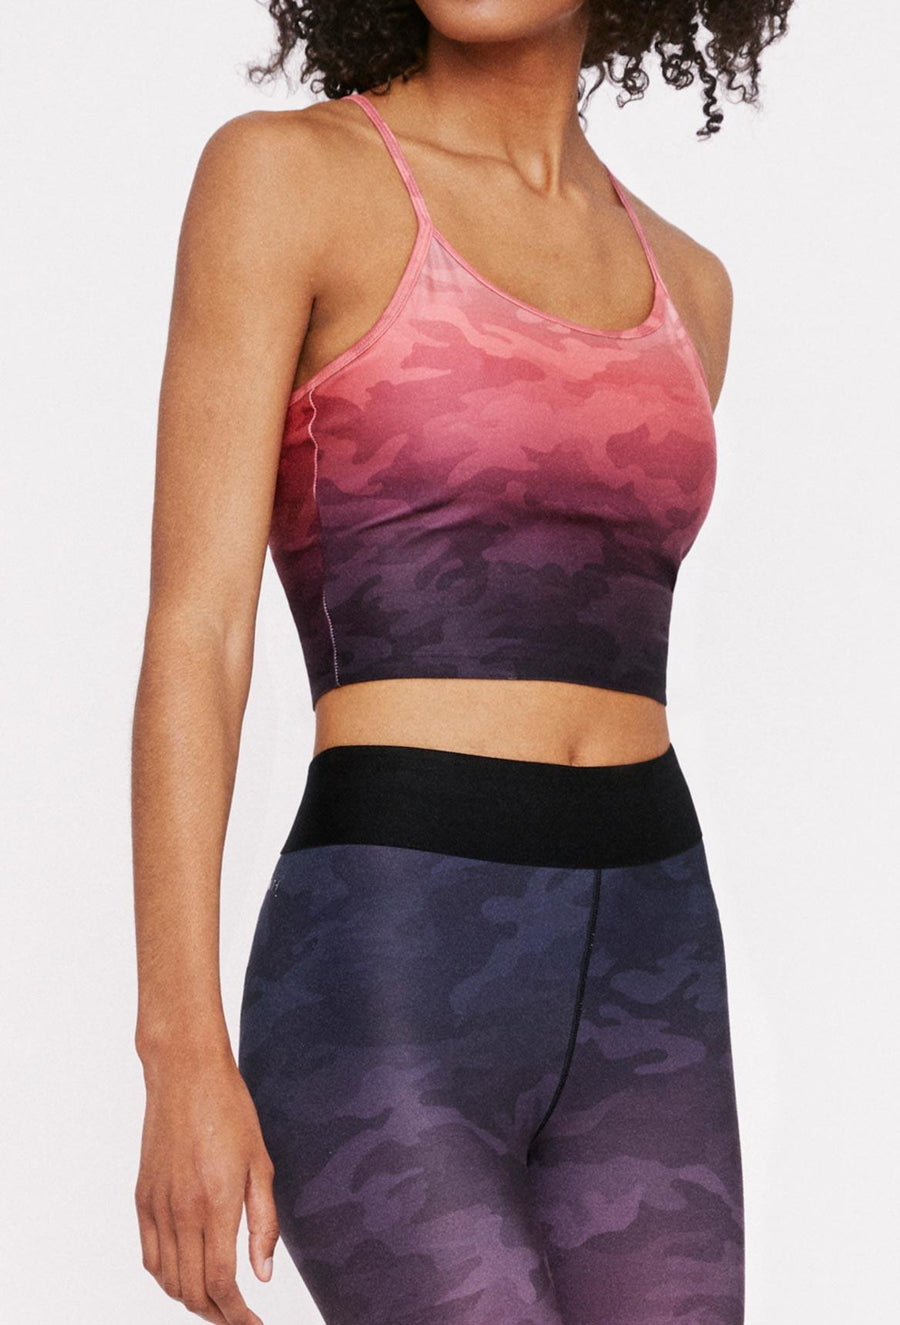 avery-cropped-tank-infrared-camoW.I.T.H.-Wear It To Heart